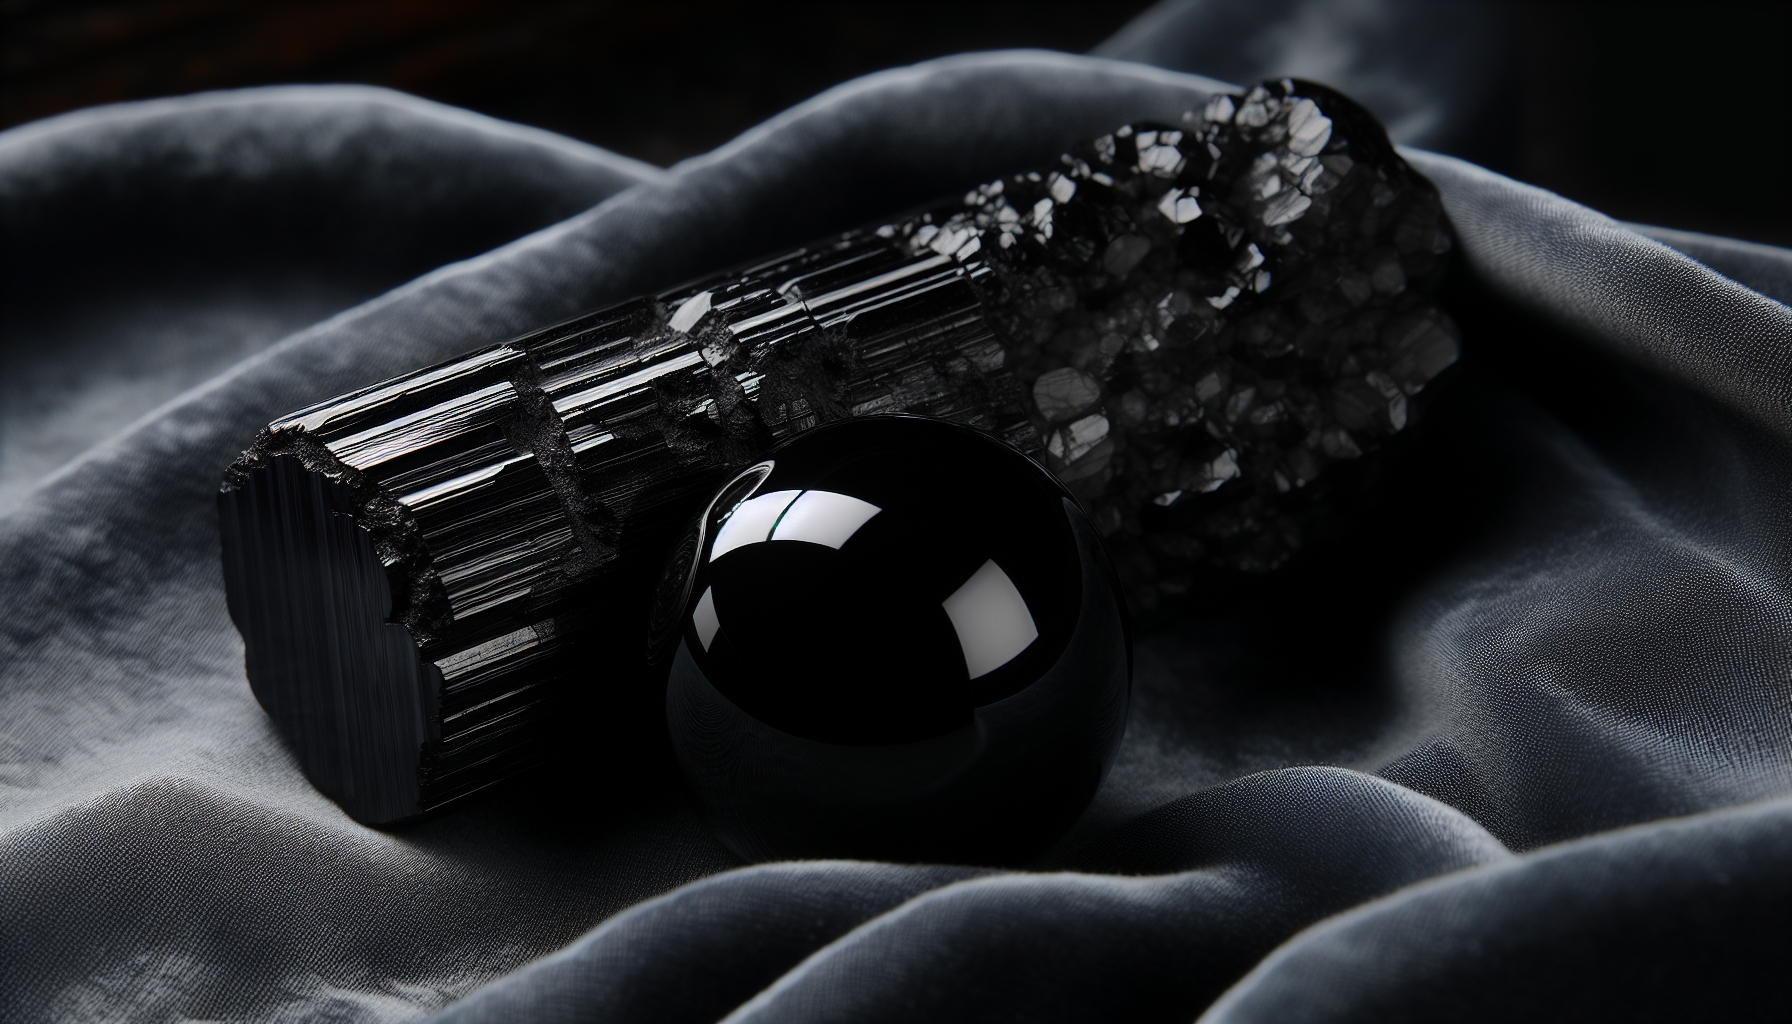 Comparison of physical characteristics between black tourmaline and obsidian